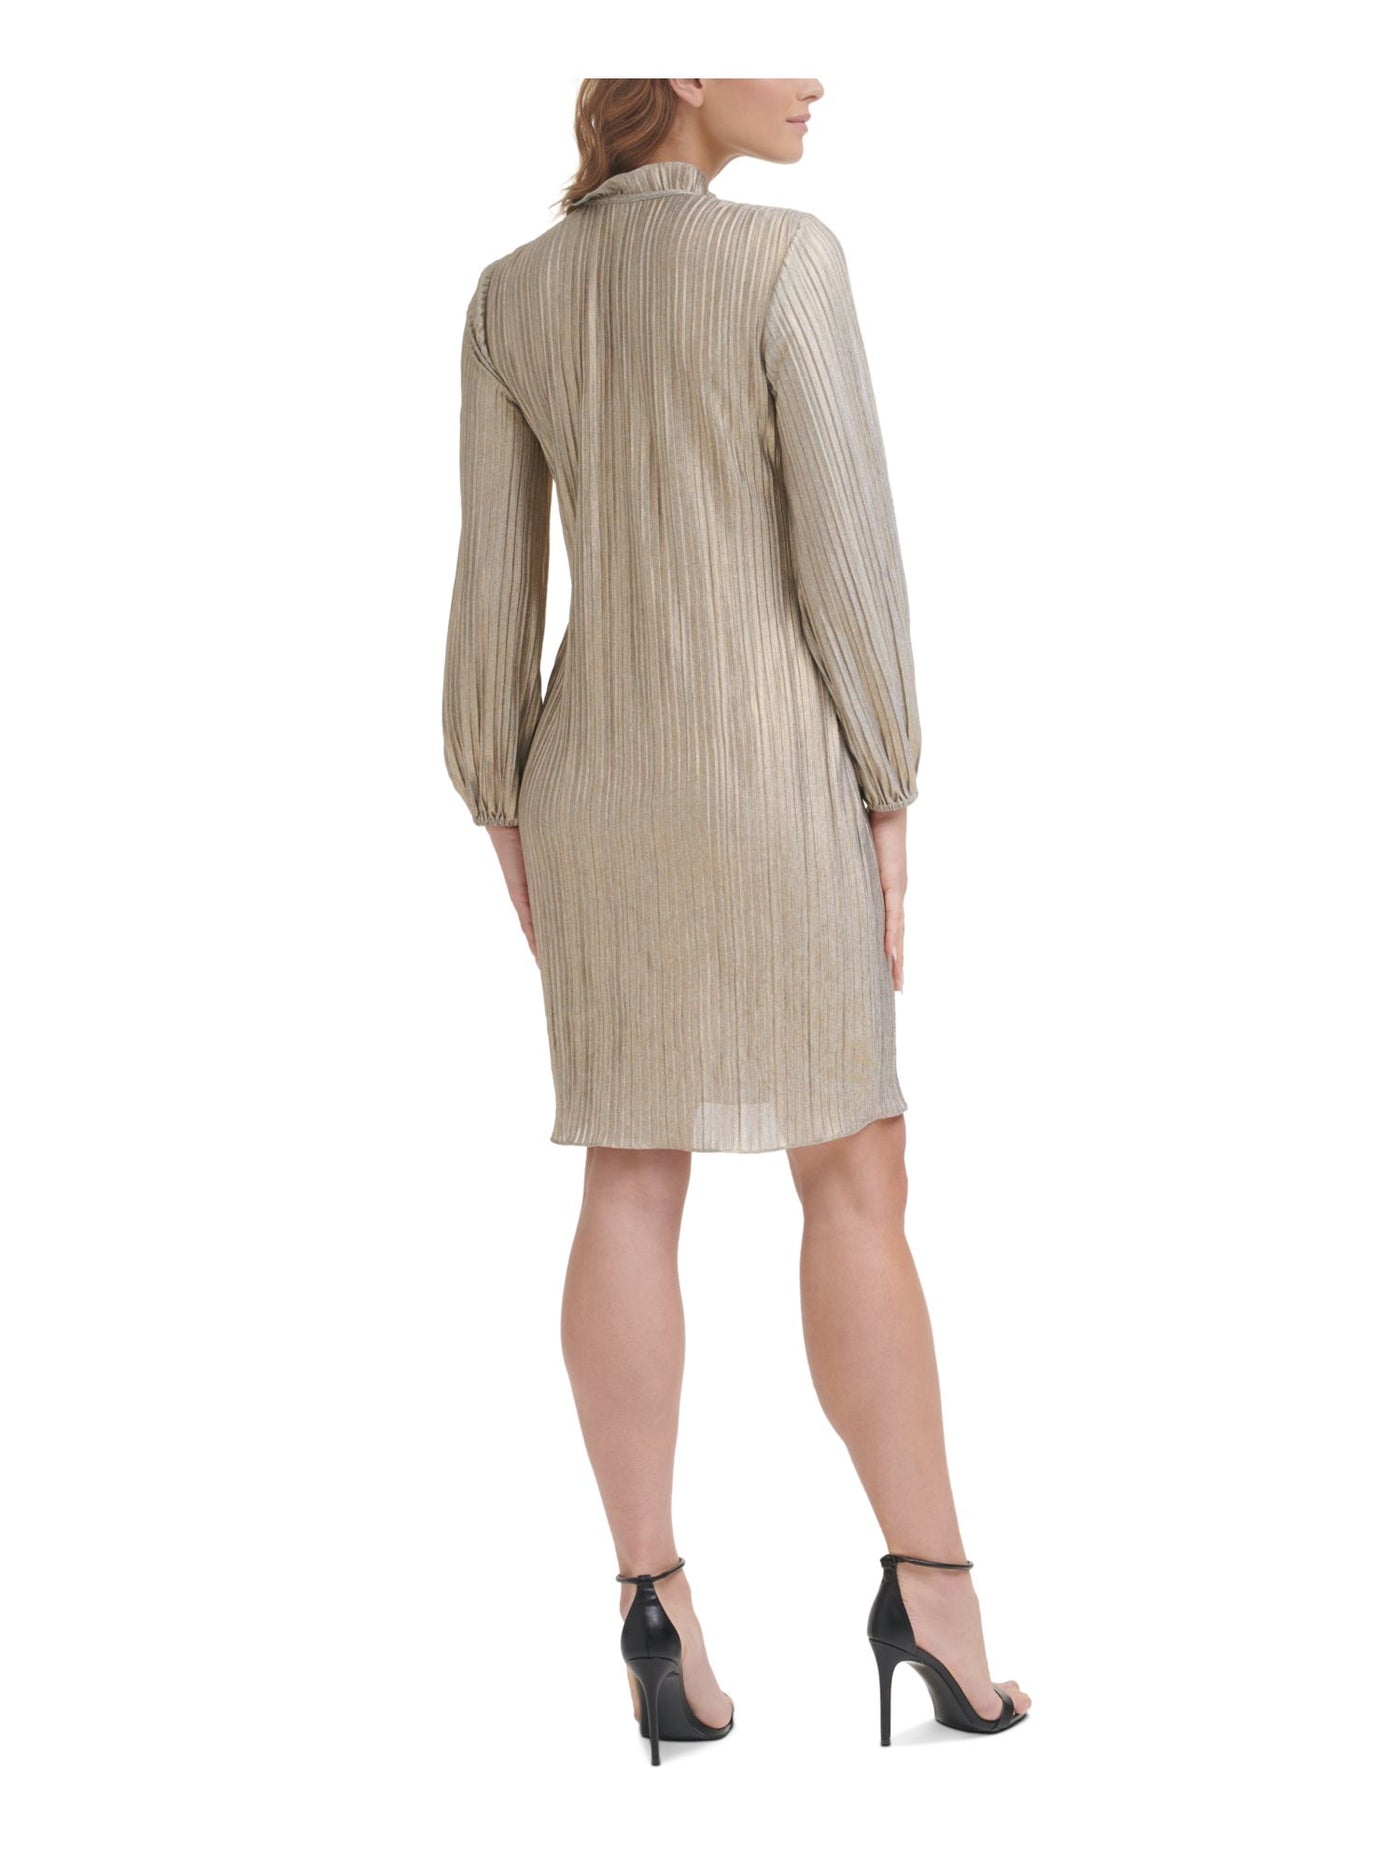 DKNY Womens Gray Pleated Pullover Keyhole Long Sleeve Tie Neck Above The Knee Wear To Work Shift Dress 12